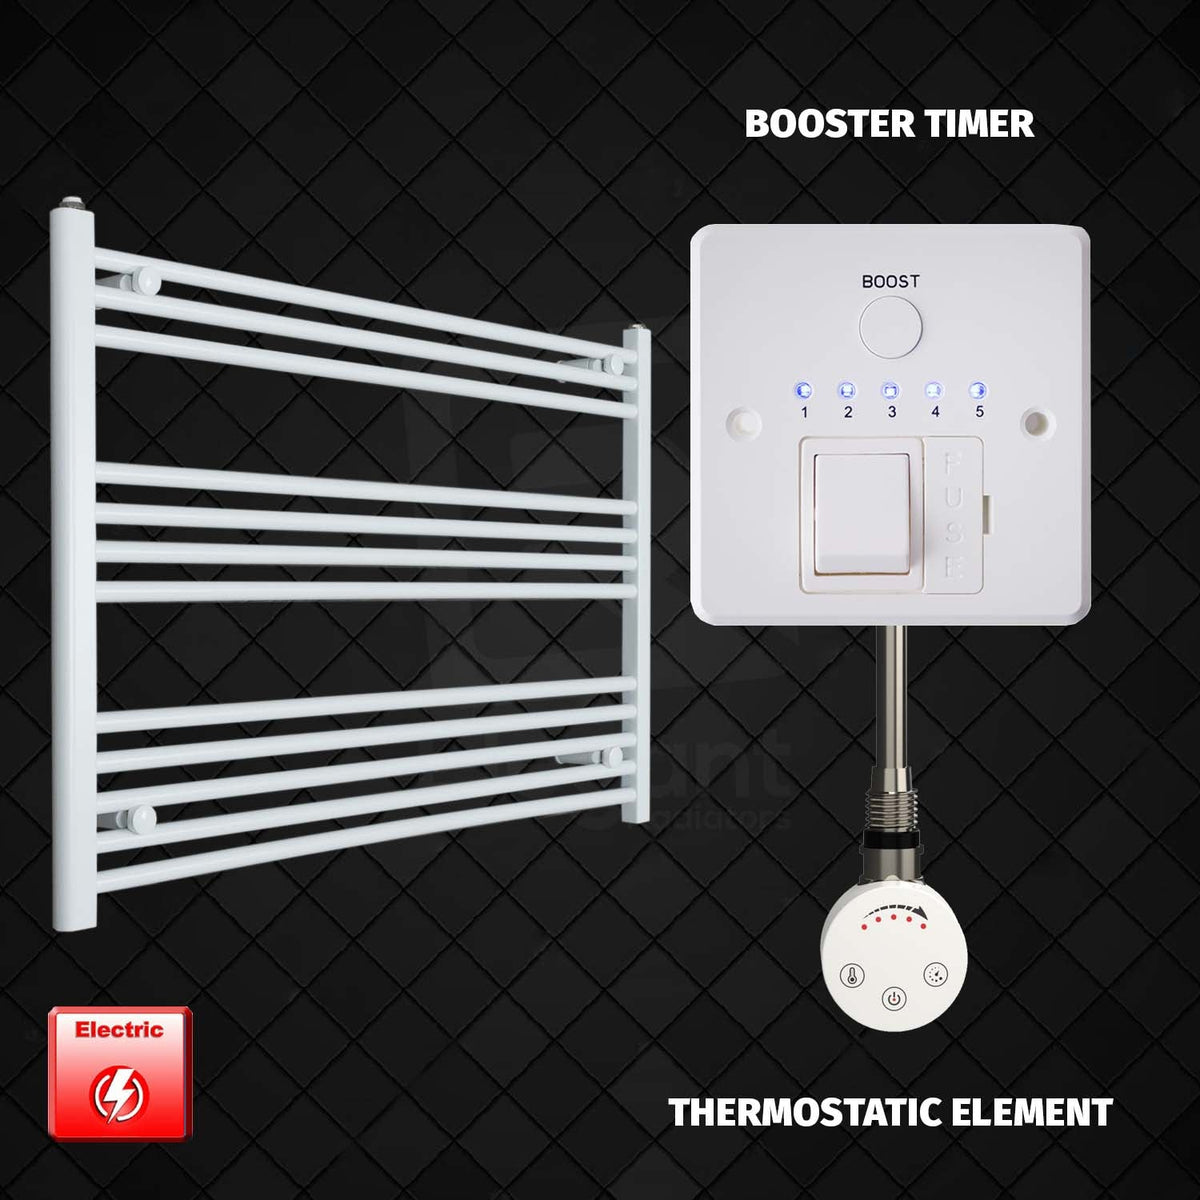 700 mm High 1000 mm Wide Pre-Filled Electric Heated Towel Rail Radiator White HTR SMR Thermostatic element Booster timer